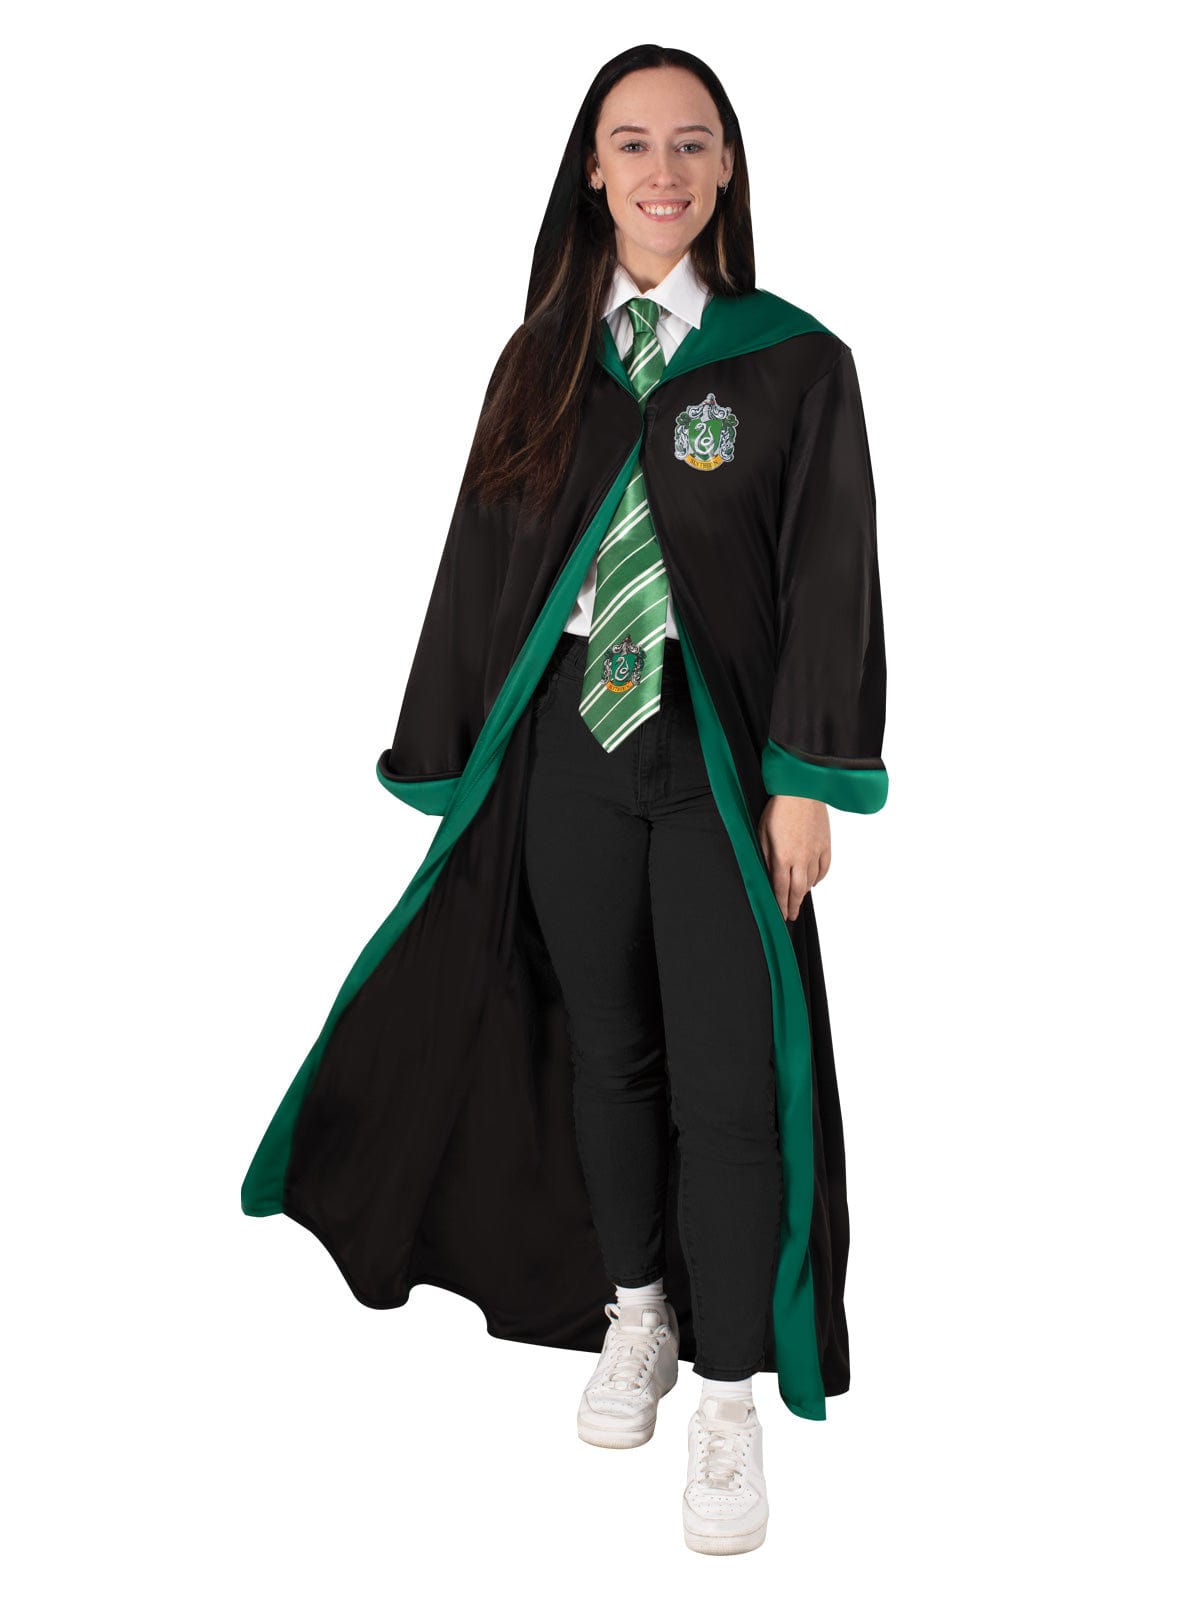 Disguise Adult Harry Potter Slytherin Deluxe Robe Costume - Size XX Large